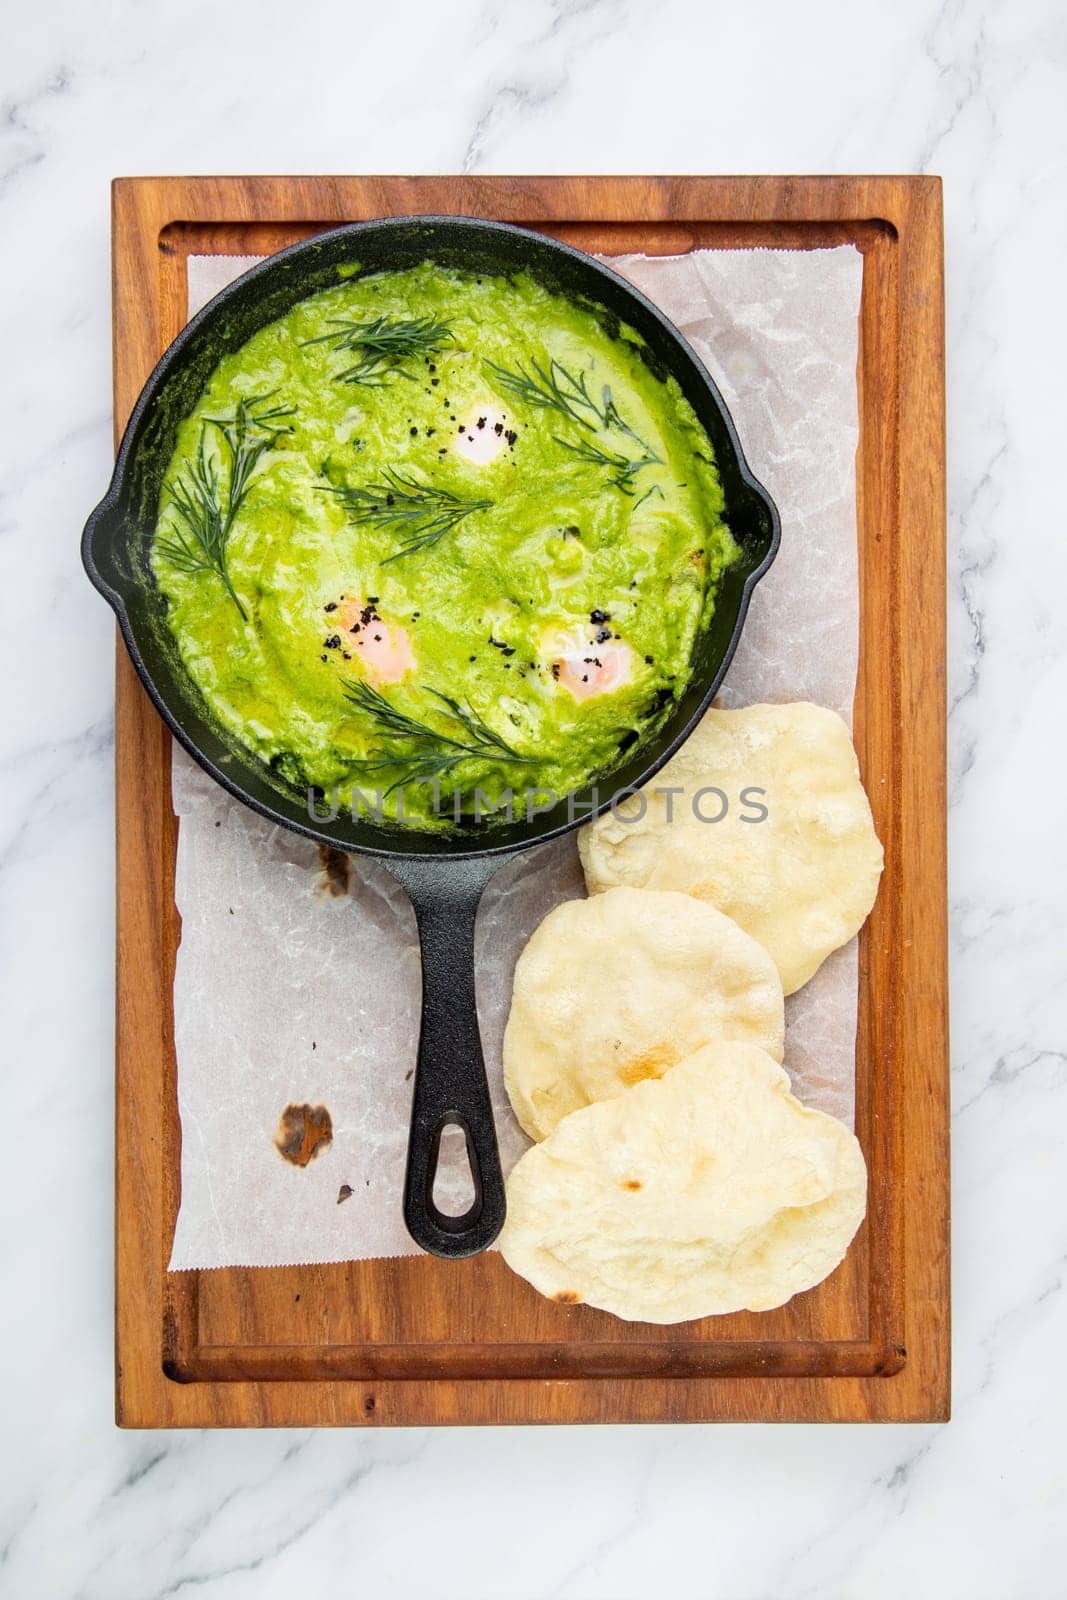 broccoli cream soup with herbs, cheese and tortillas in a frying pan, top view by tewolf